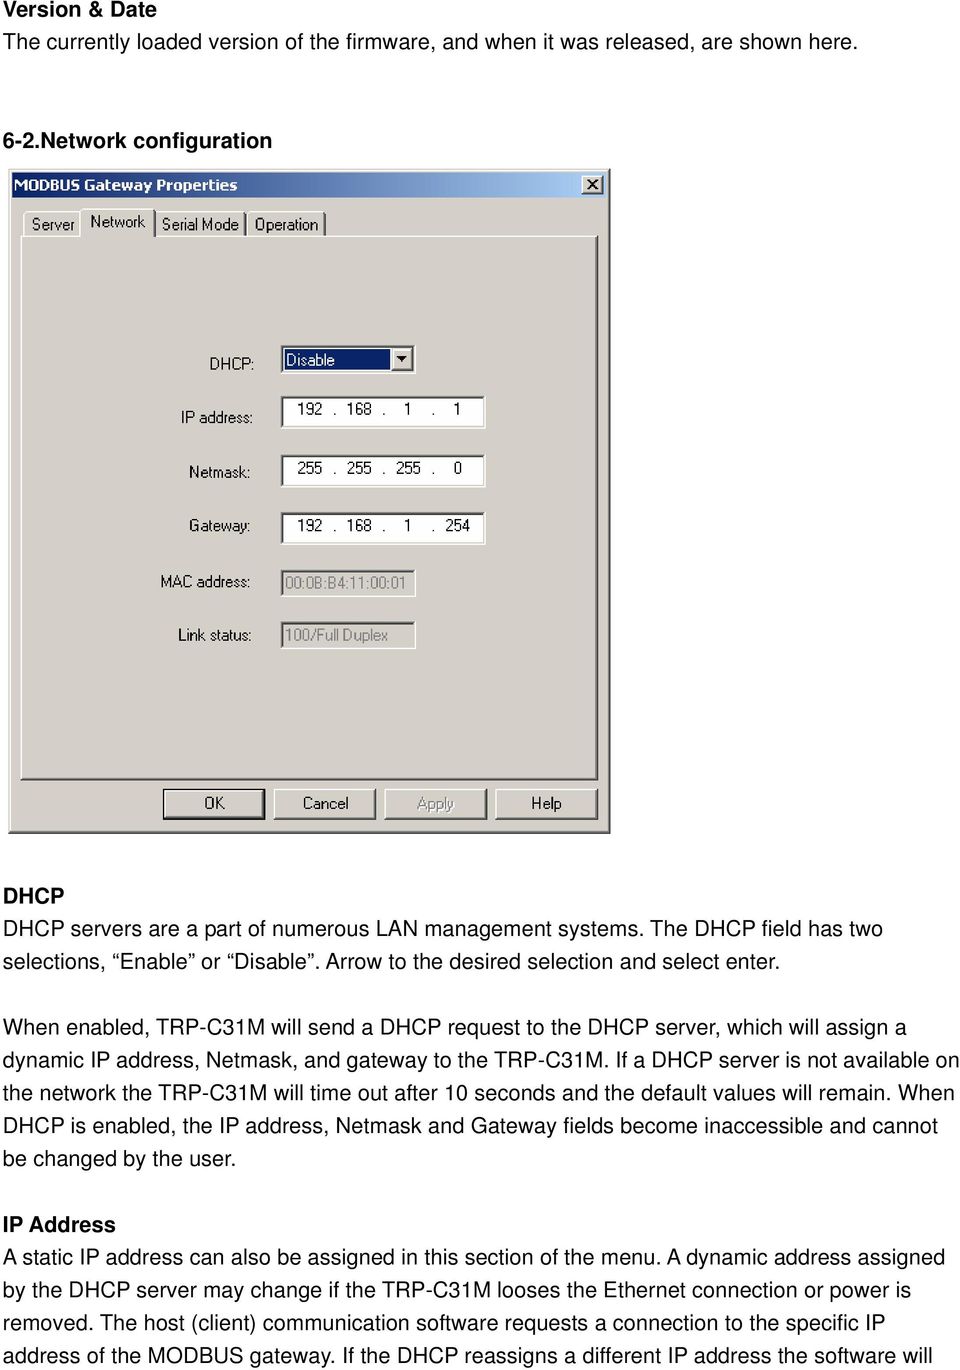 When enabled, TRP-C31M will send a DHCP request to the DHCP server, which will assign a dynamic IP address, Netmask, and gateway to the TRP-C31M.